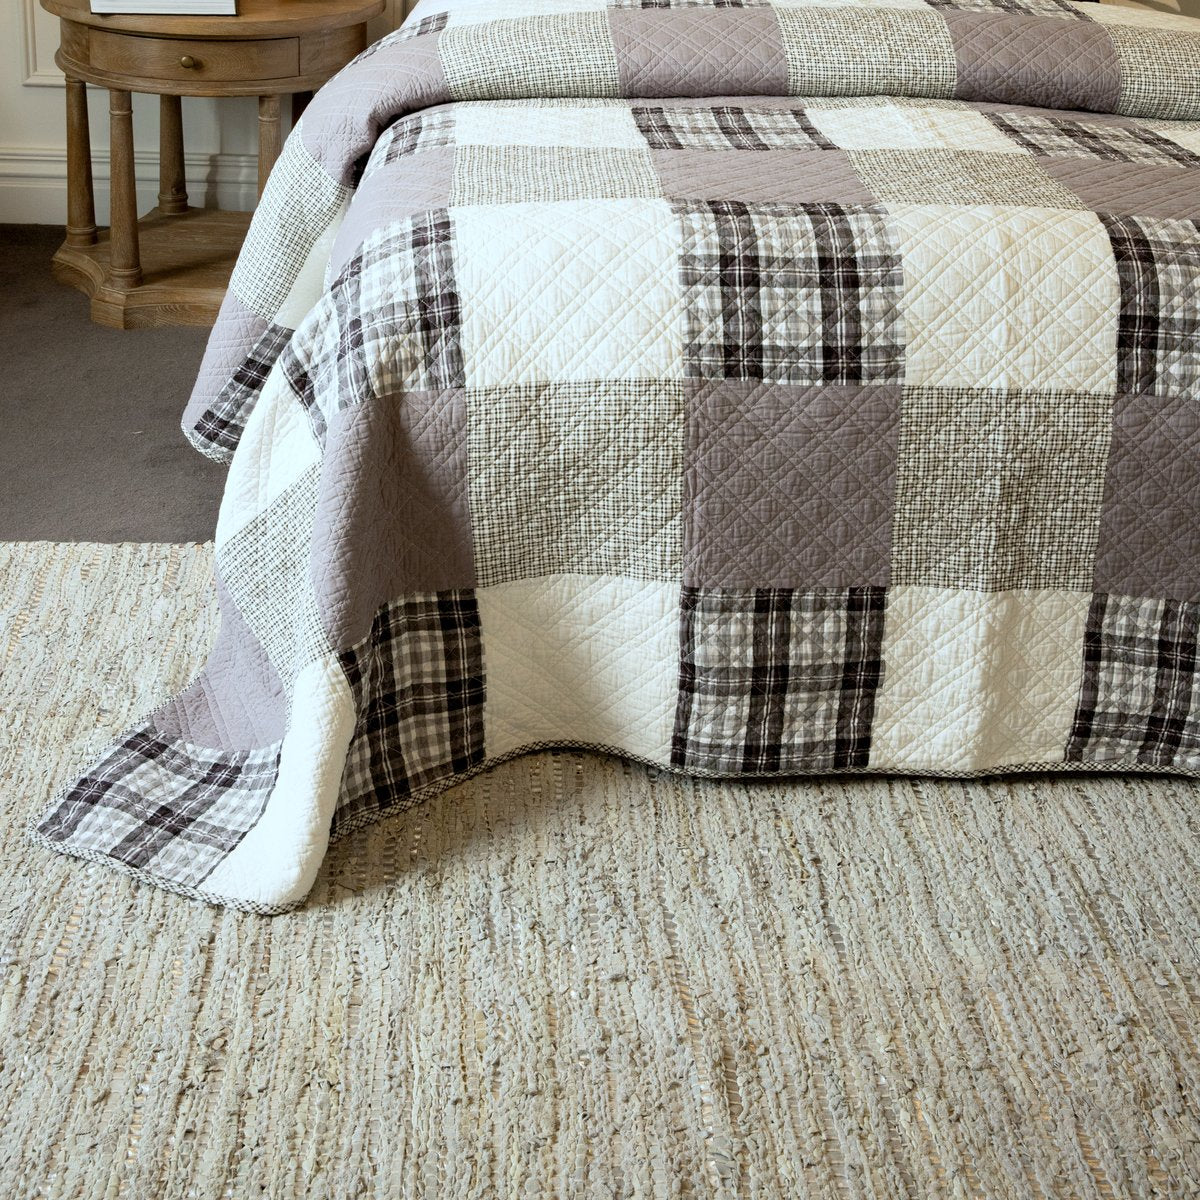 Hand Woven Rug in Neutral - 200cm